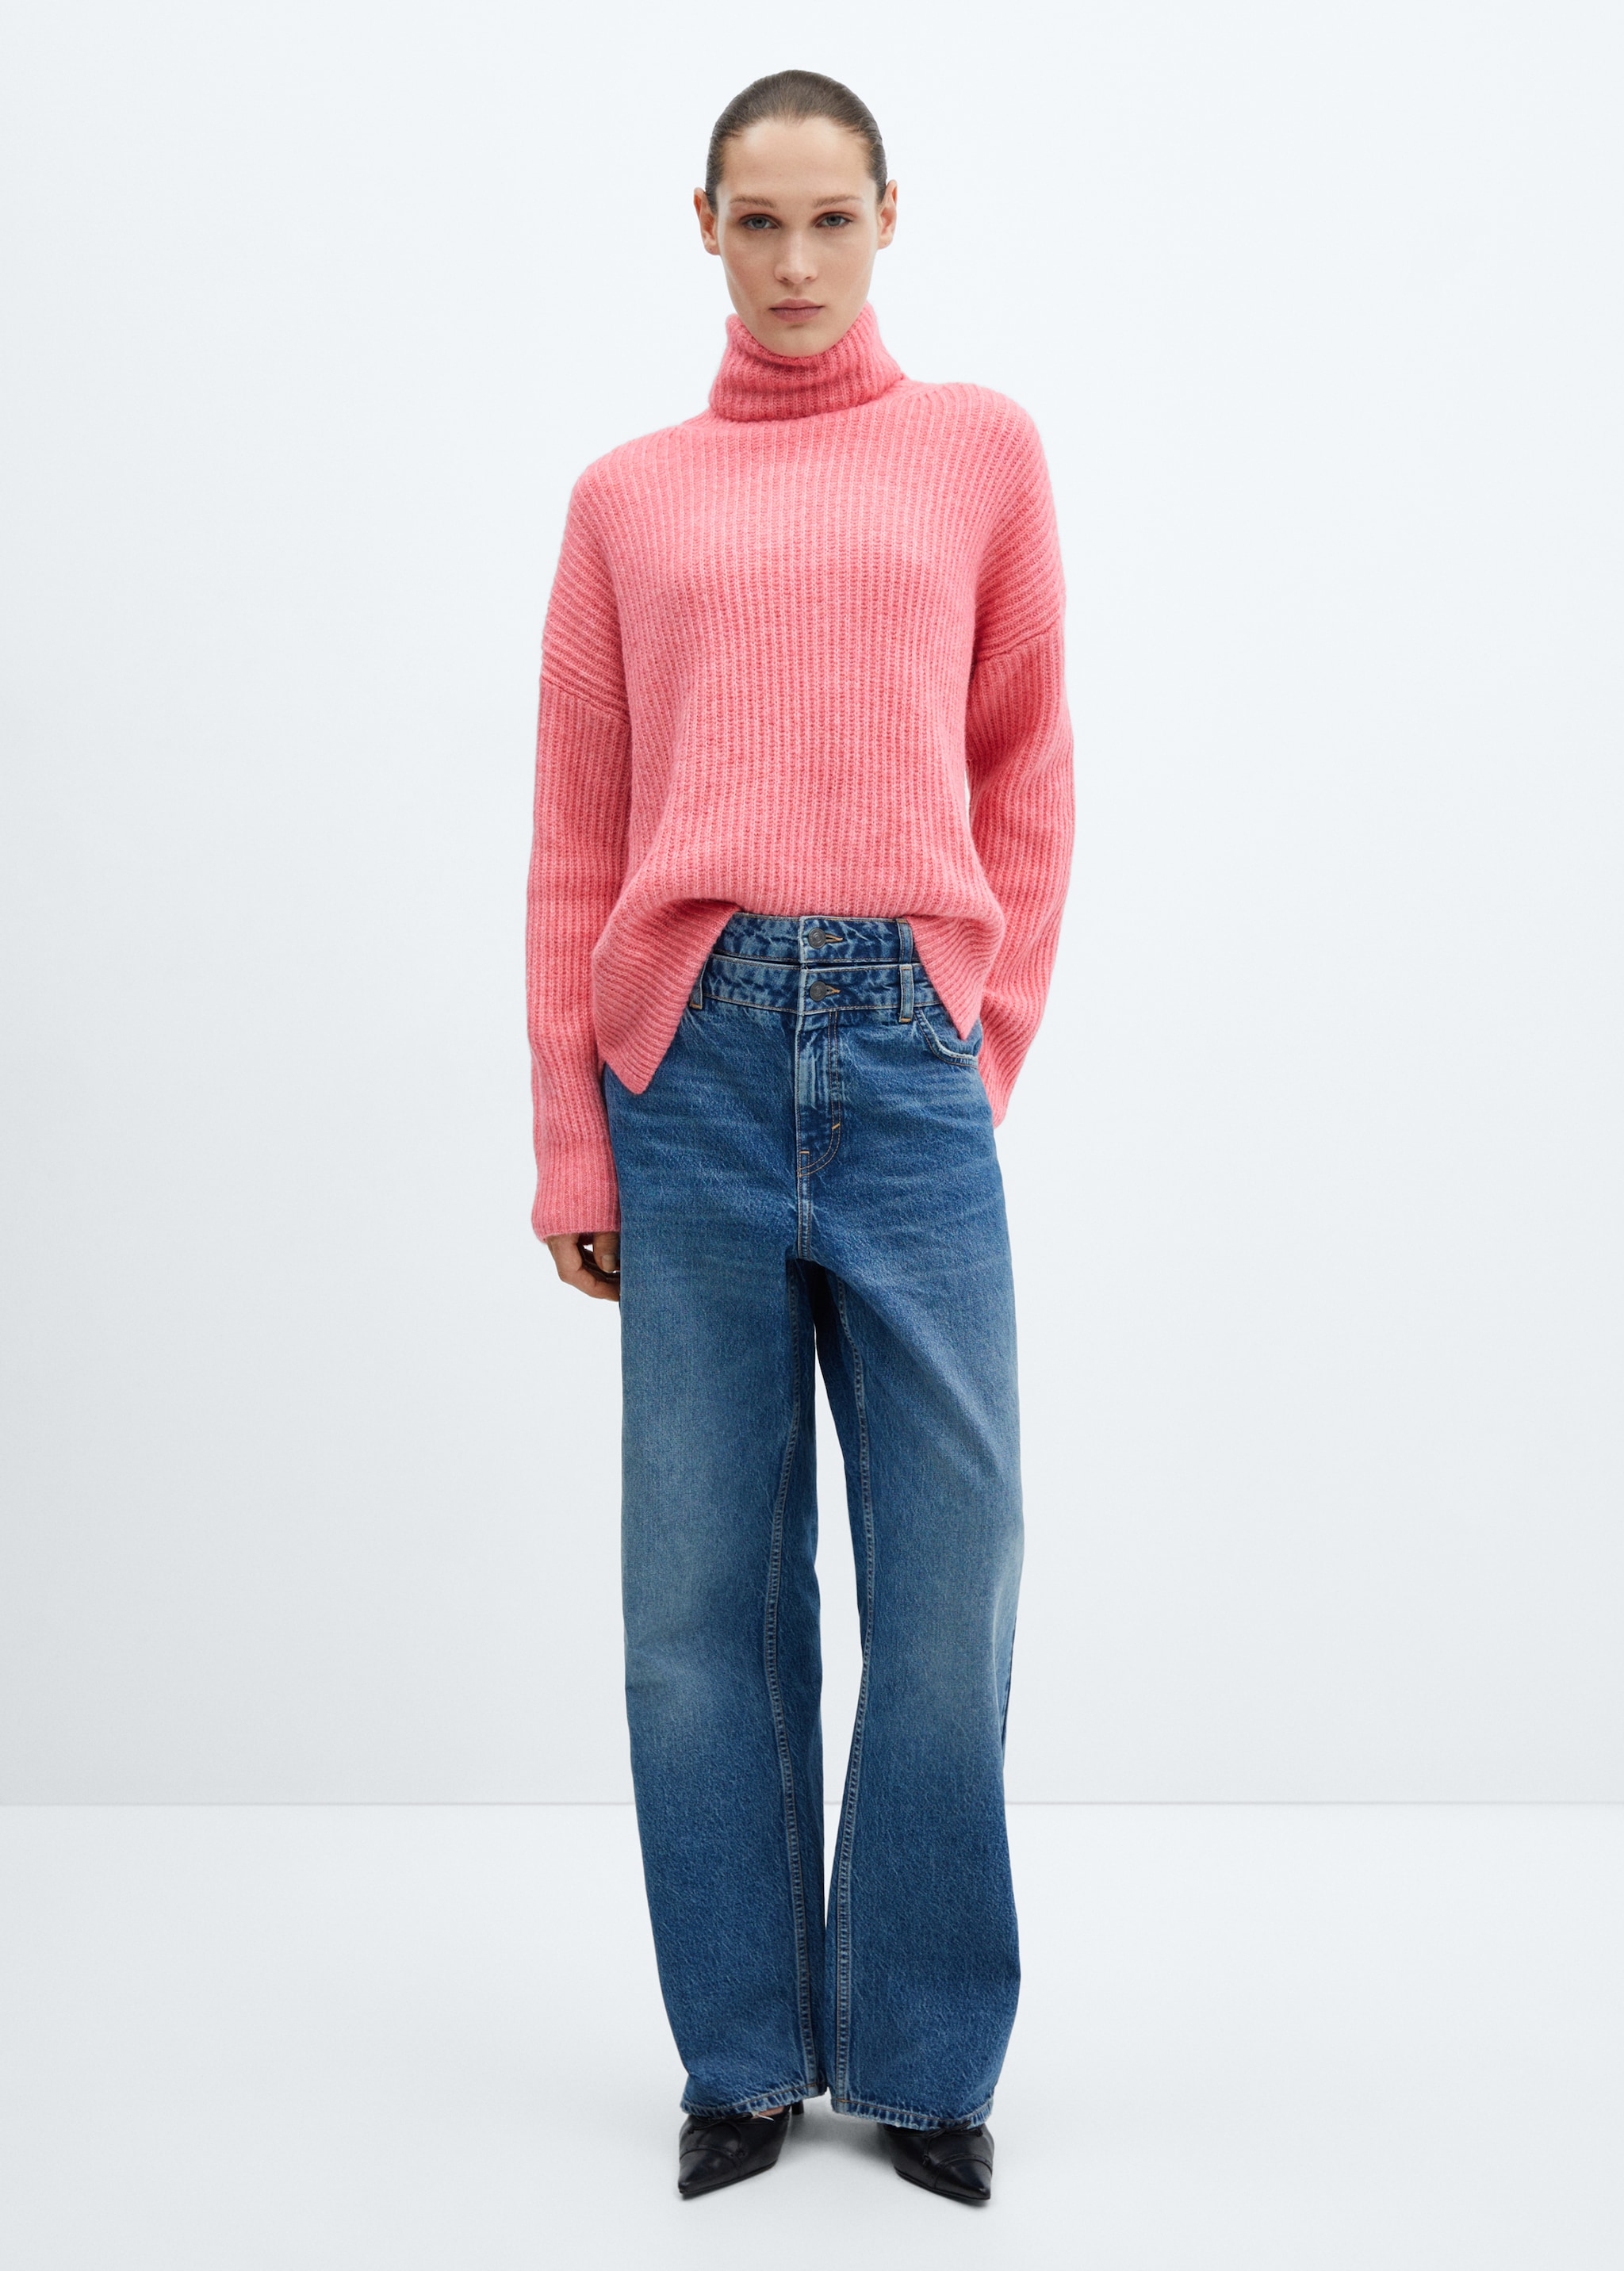 Rolled neck cable sweater - General plane